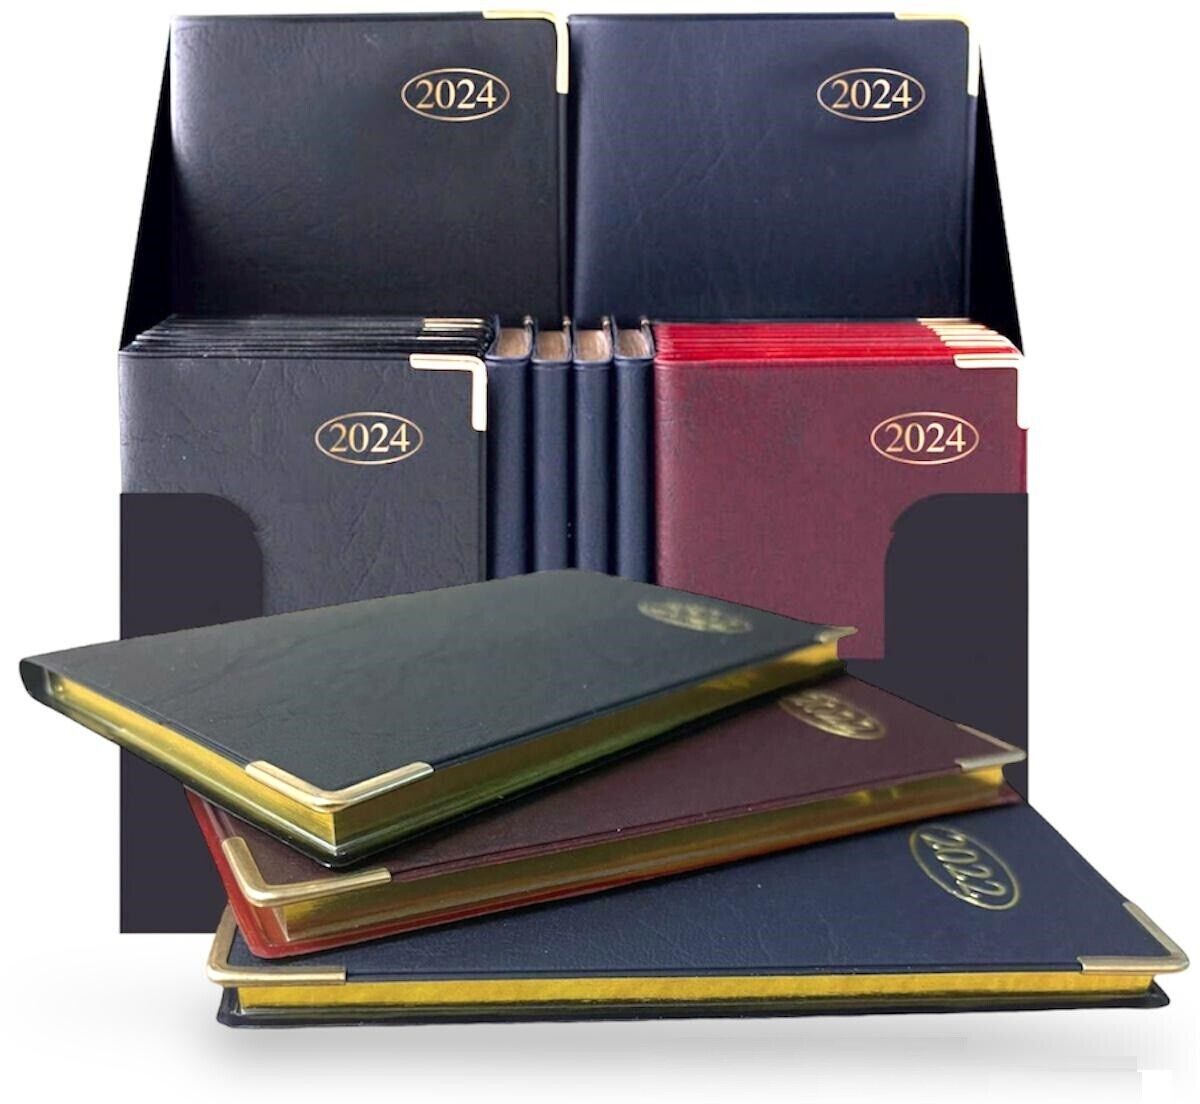 Beclen Harp 2024 Week To View/WTV Personal Diary With Luxury Cover And Metal Corner